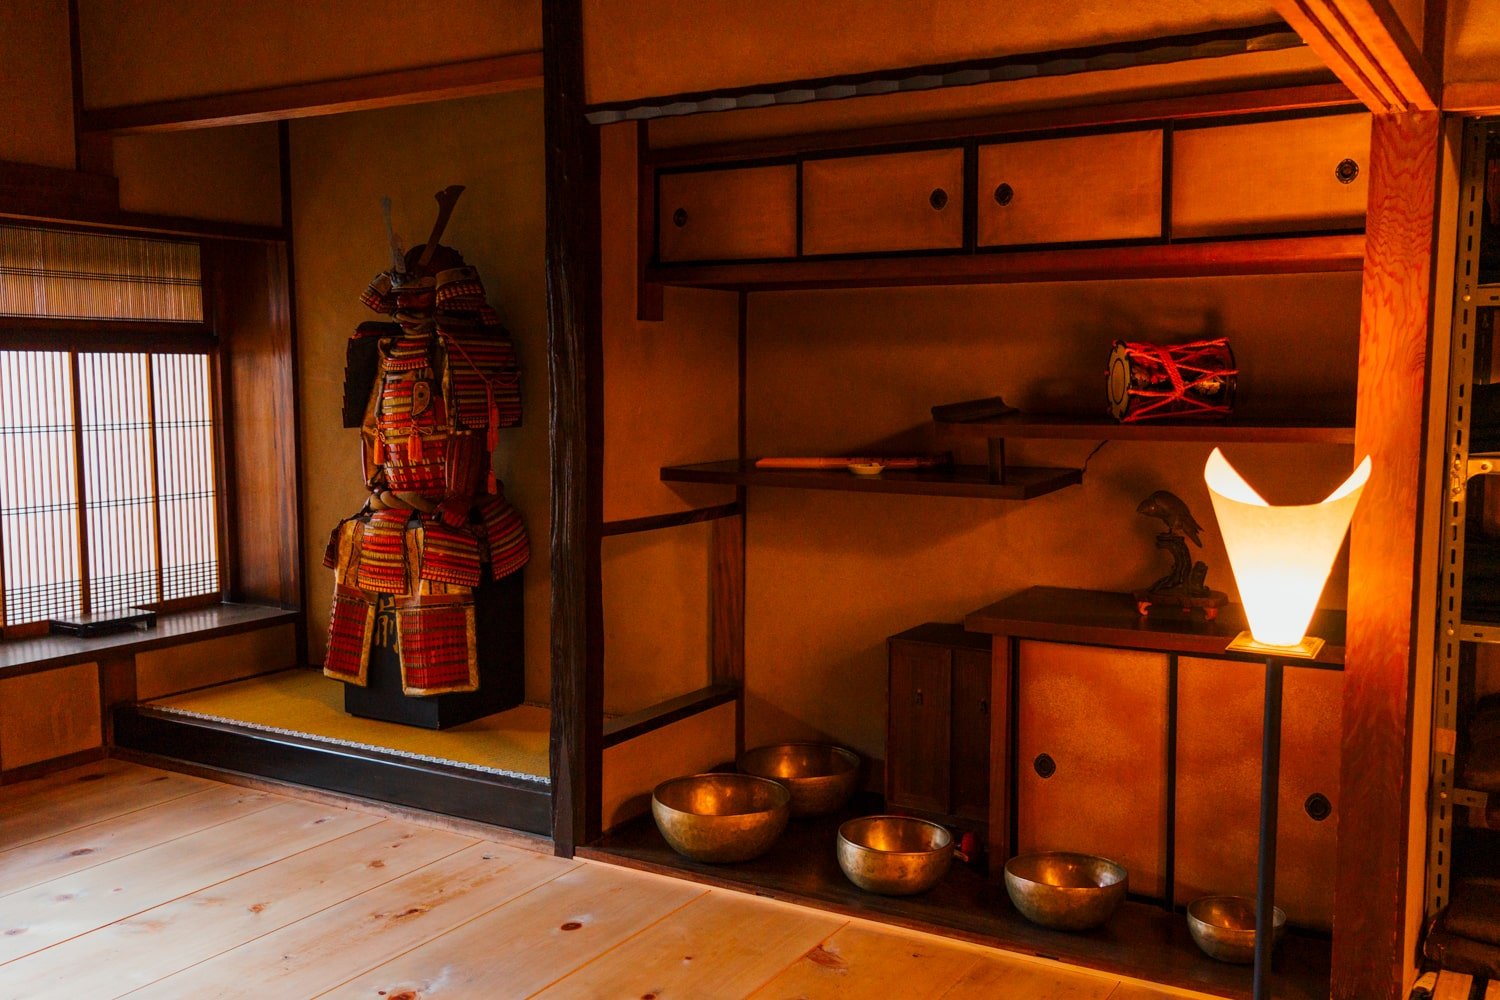 Traditional samurai armor and zen meditation bowls on display inside former samurai officer's historic townhouse in Kyoto, Japan.